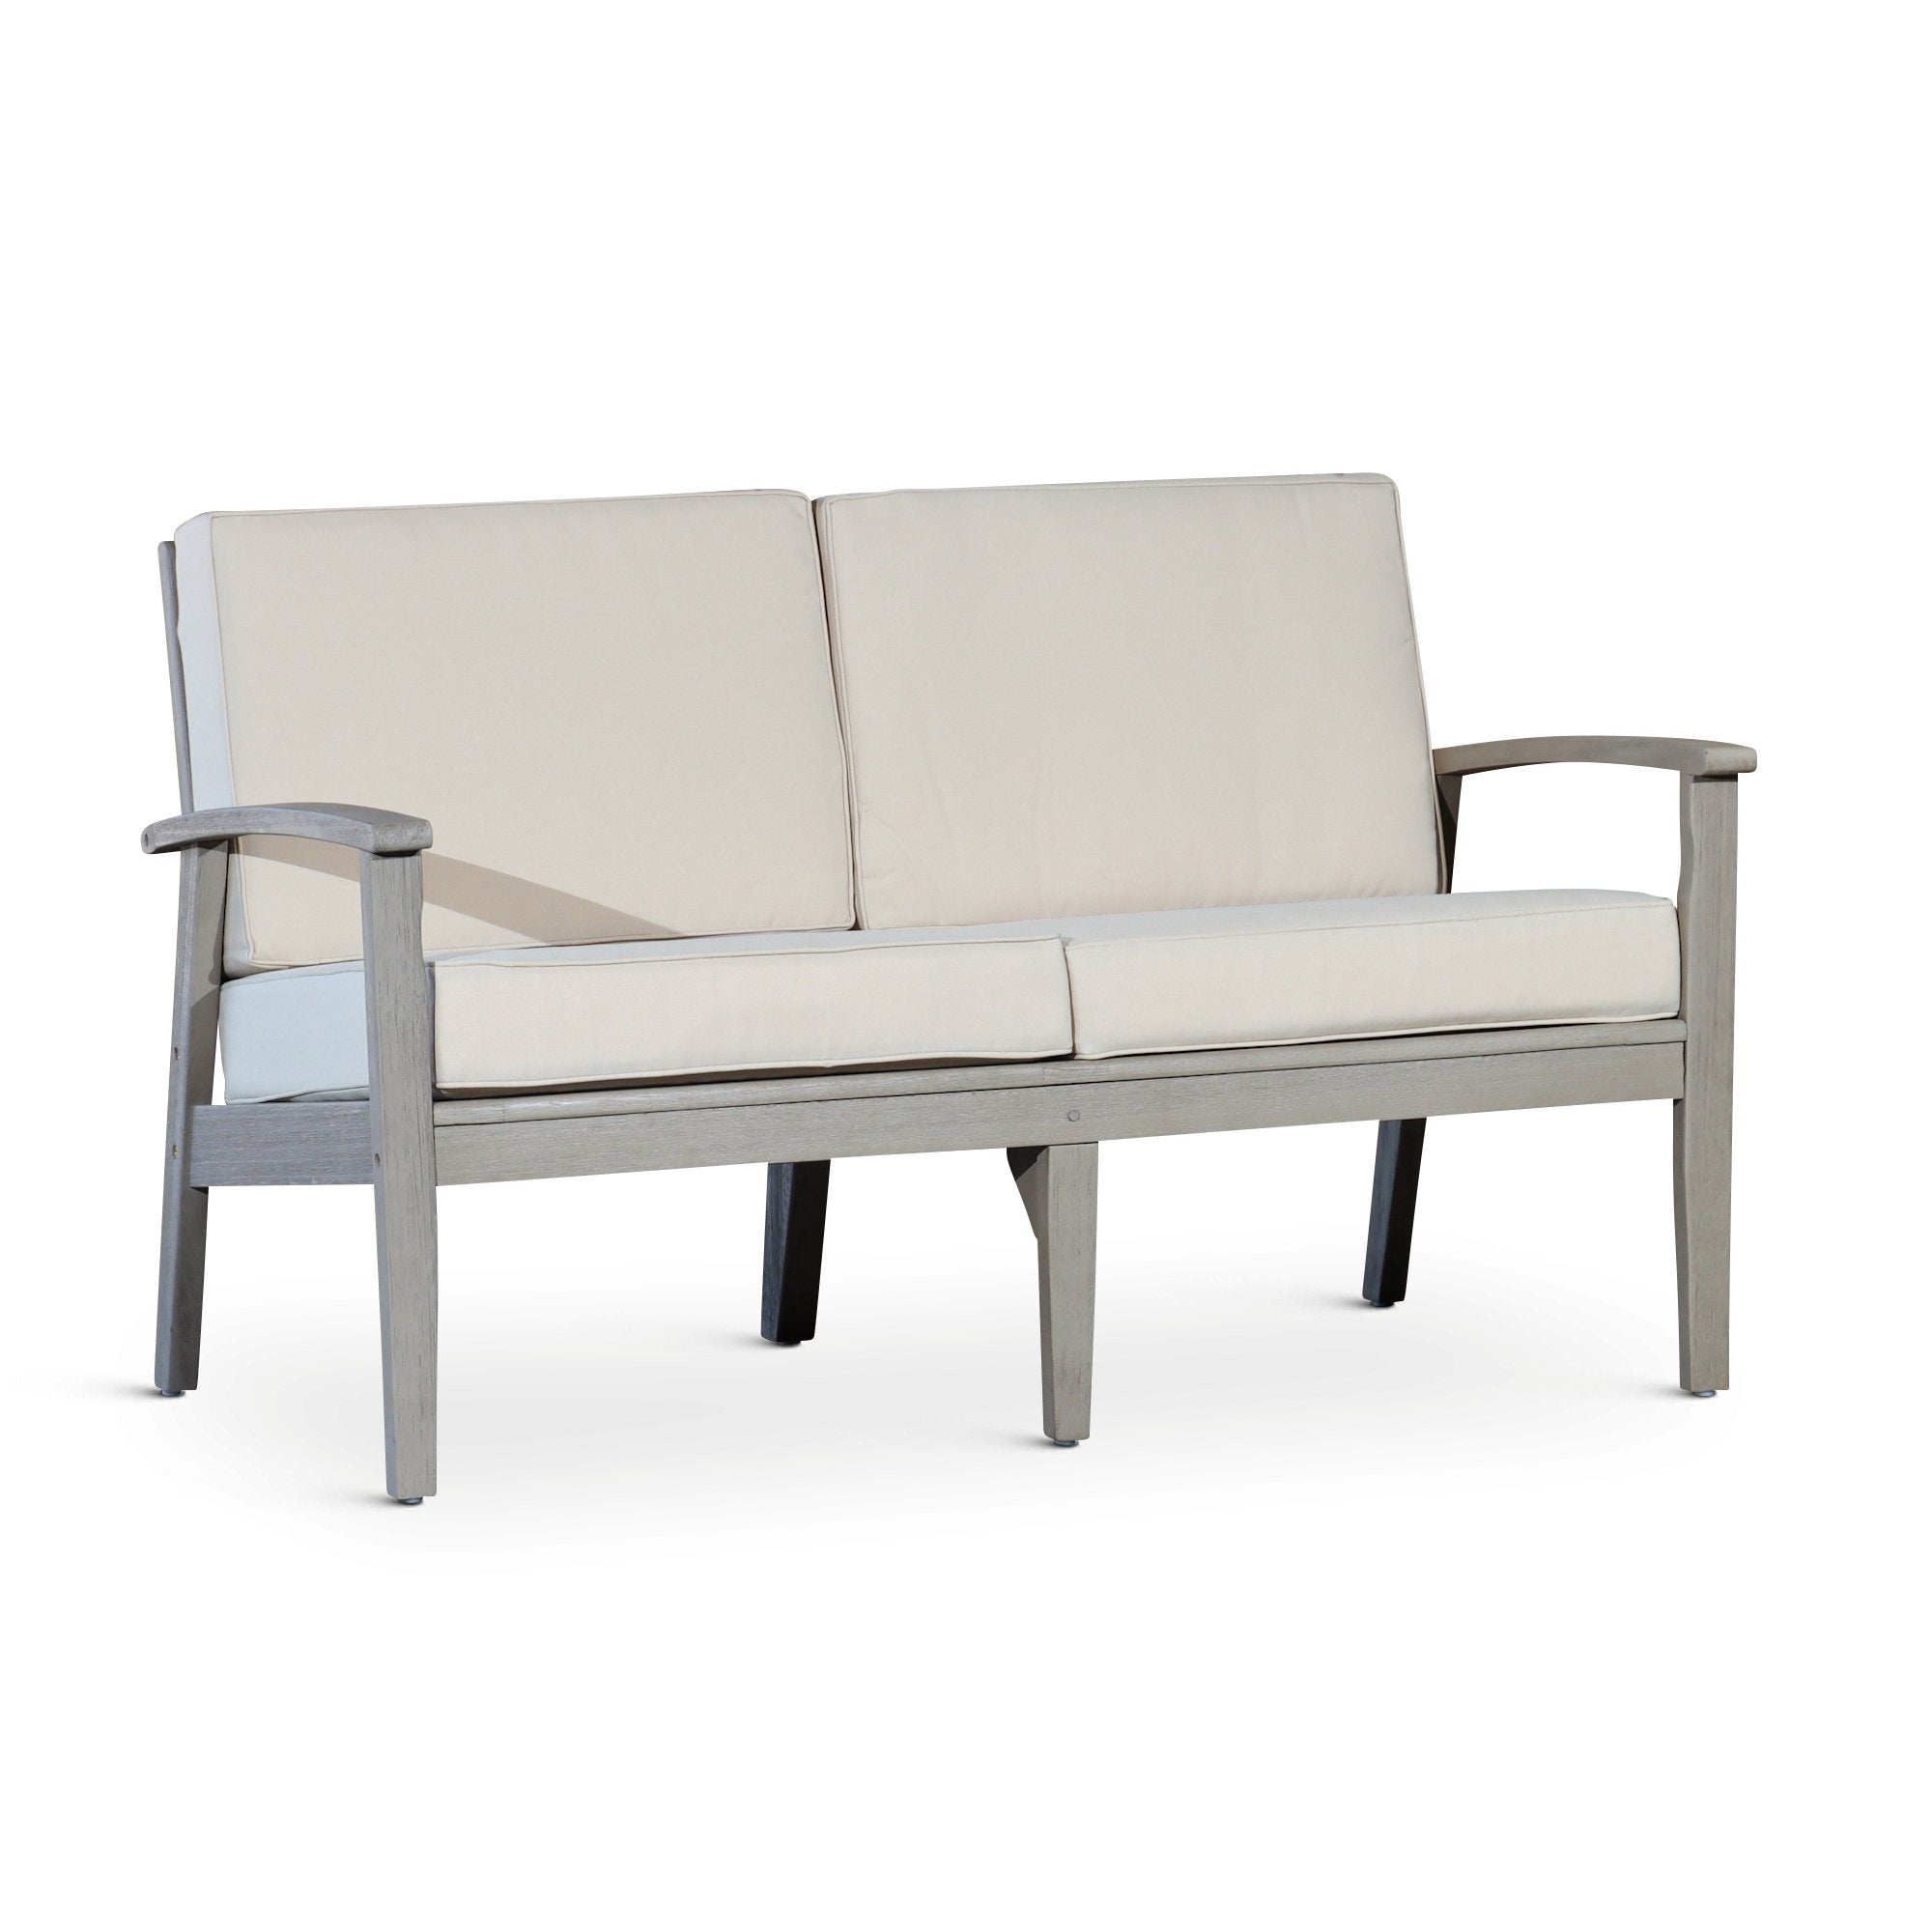 Outdoor-Loveseat-with-Cushions,-Driftwood-Gray-Finish,-Sand-Cushions-Outdoor-Chairs